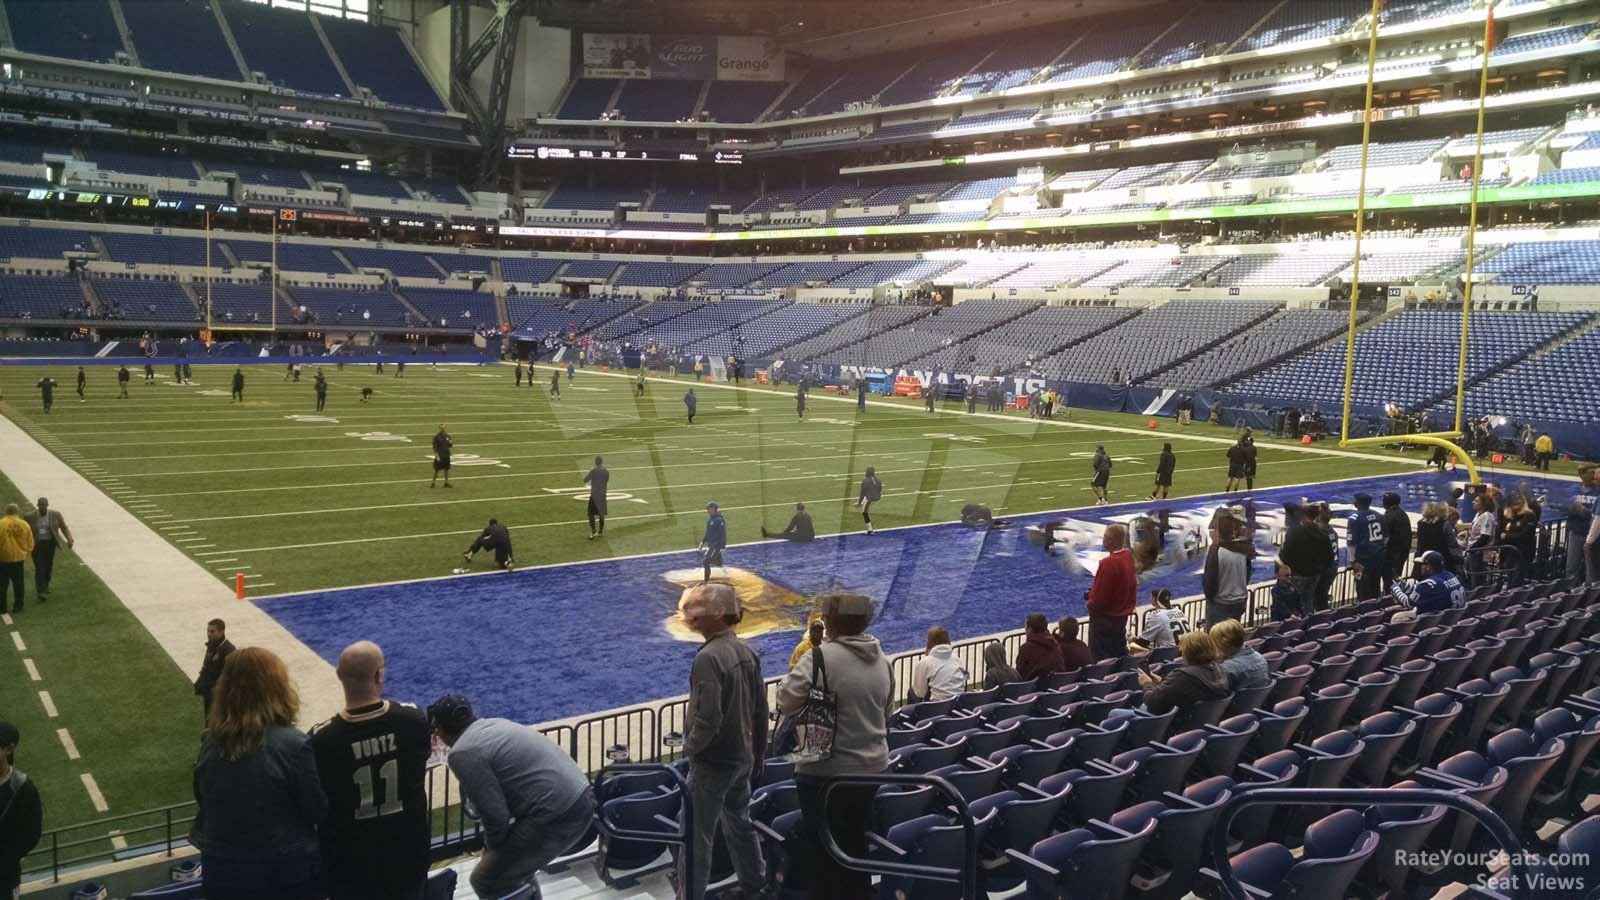 section 103, row 12 seat view  for football - lucas oil stadium